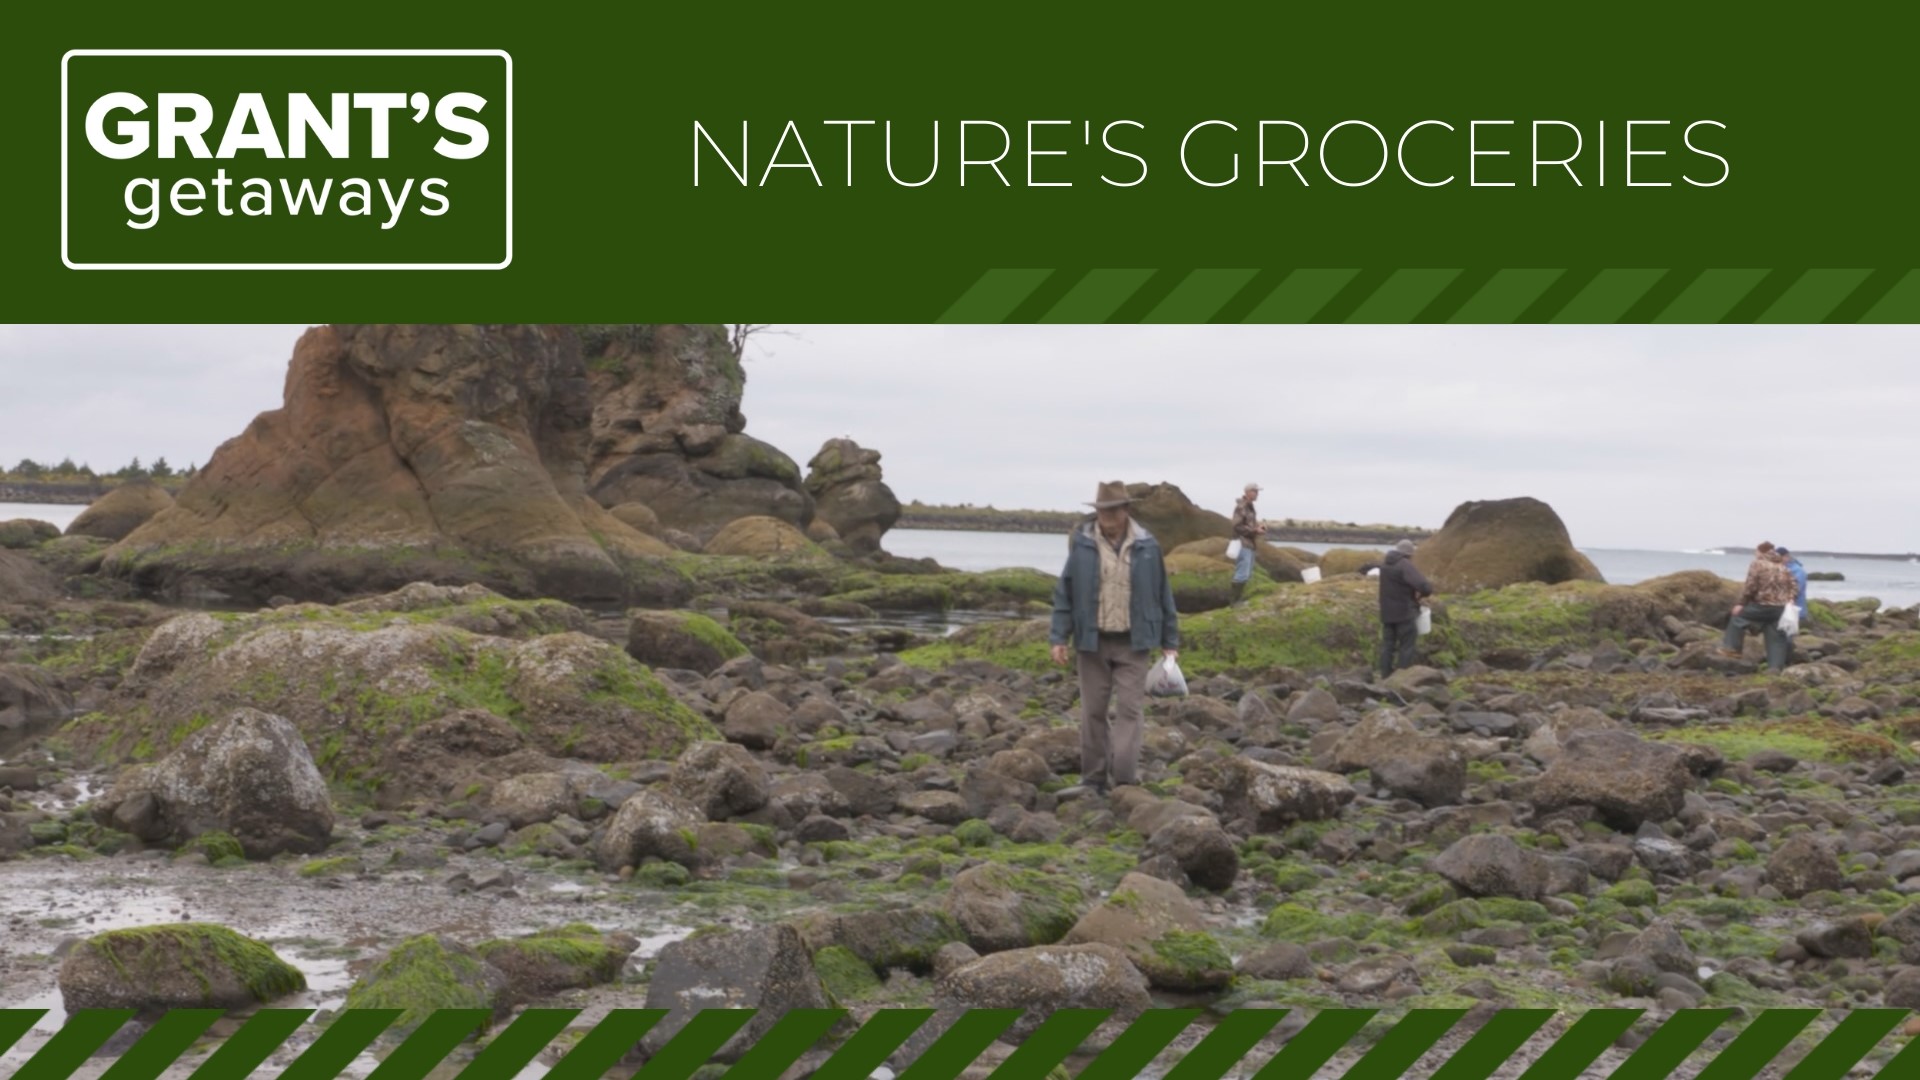 John Kallas knows just where to find Oregon's tasty shellfish, seaweed and edible plants, making quick work of foraging for food.